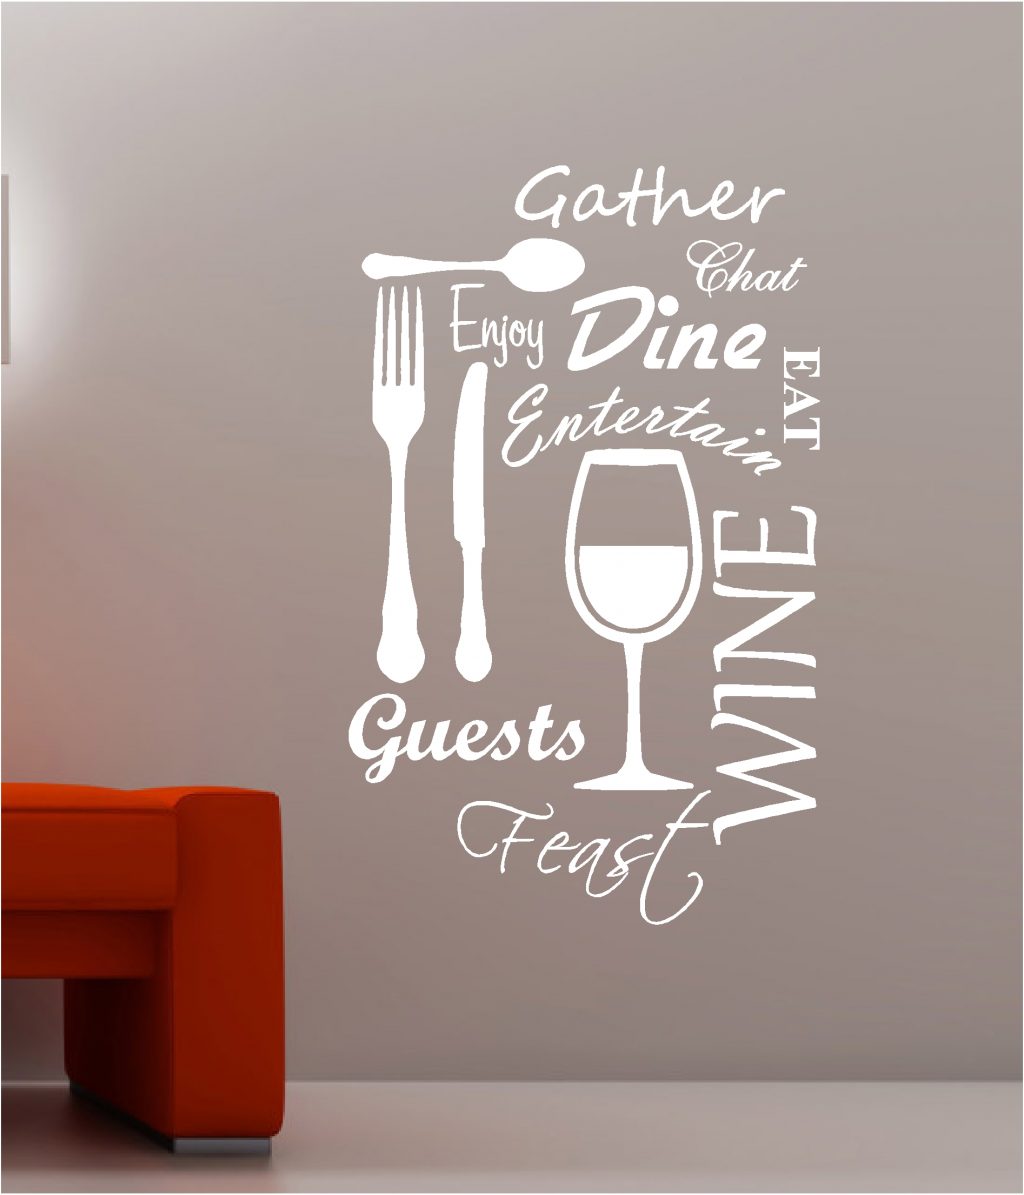 patio outdoor areas Vinyl Stickers for Outdoor Places - 2